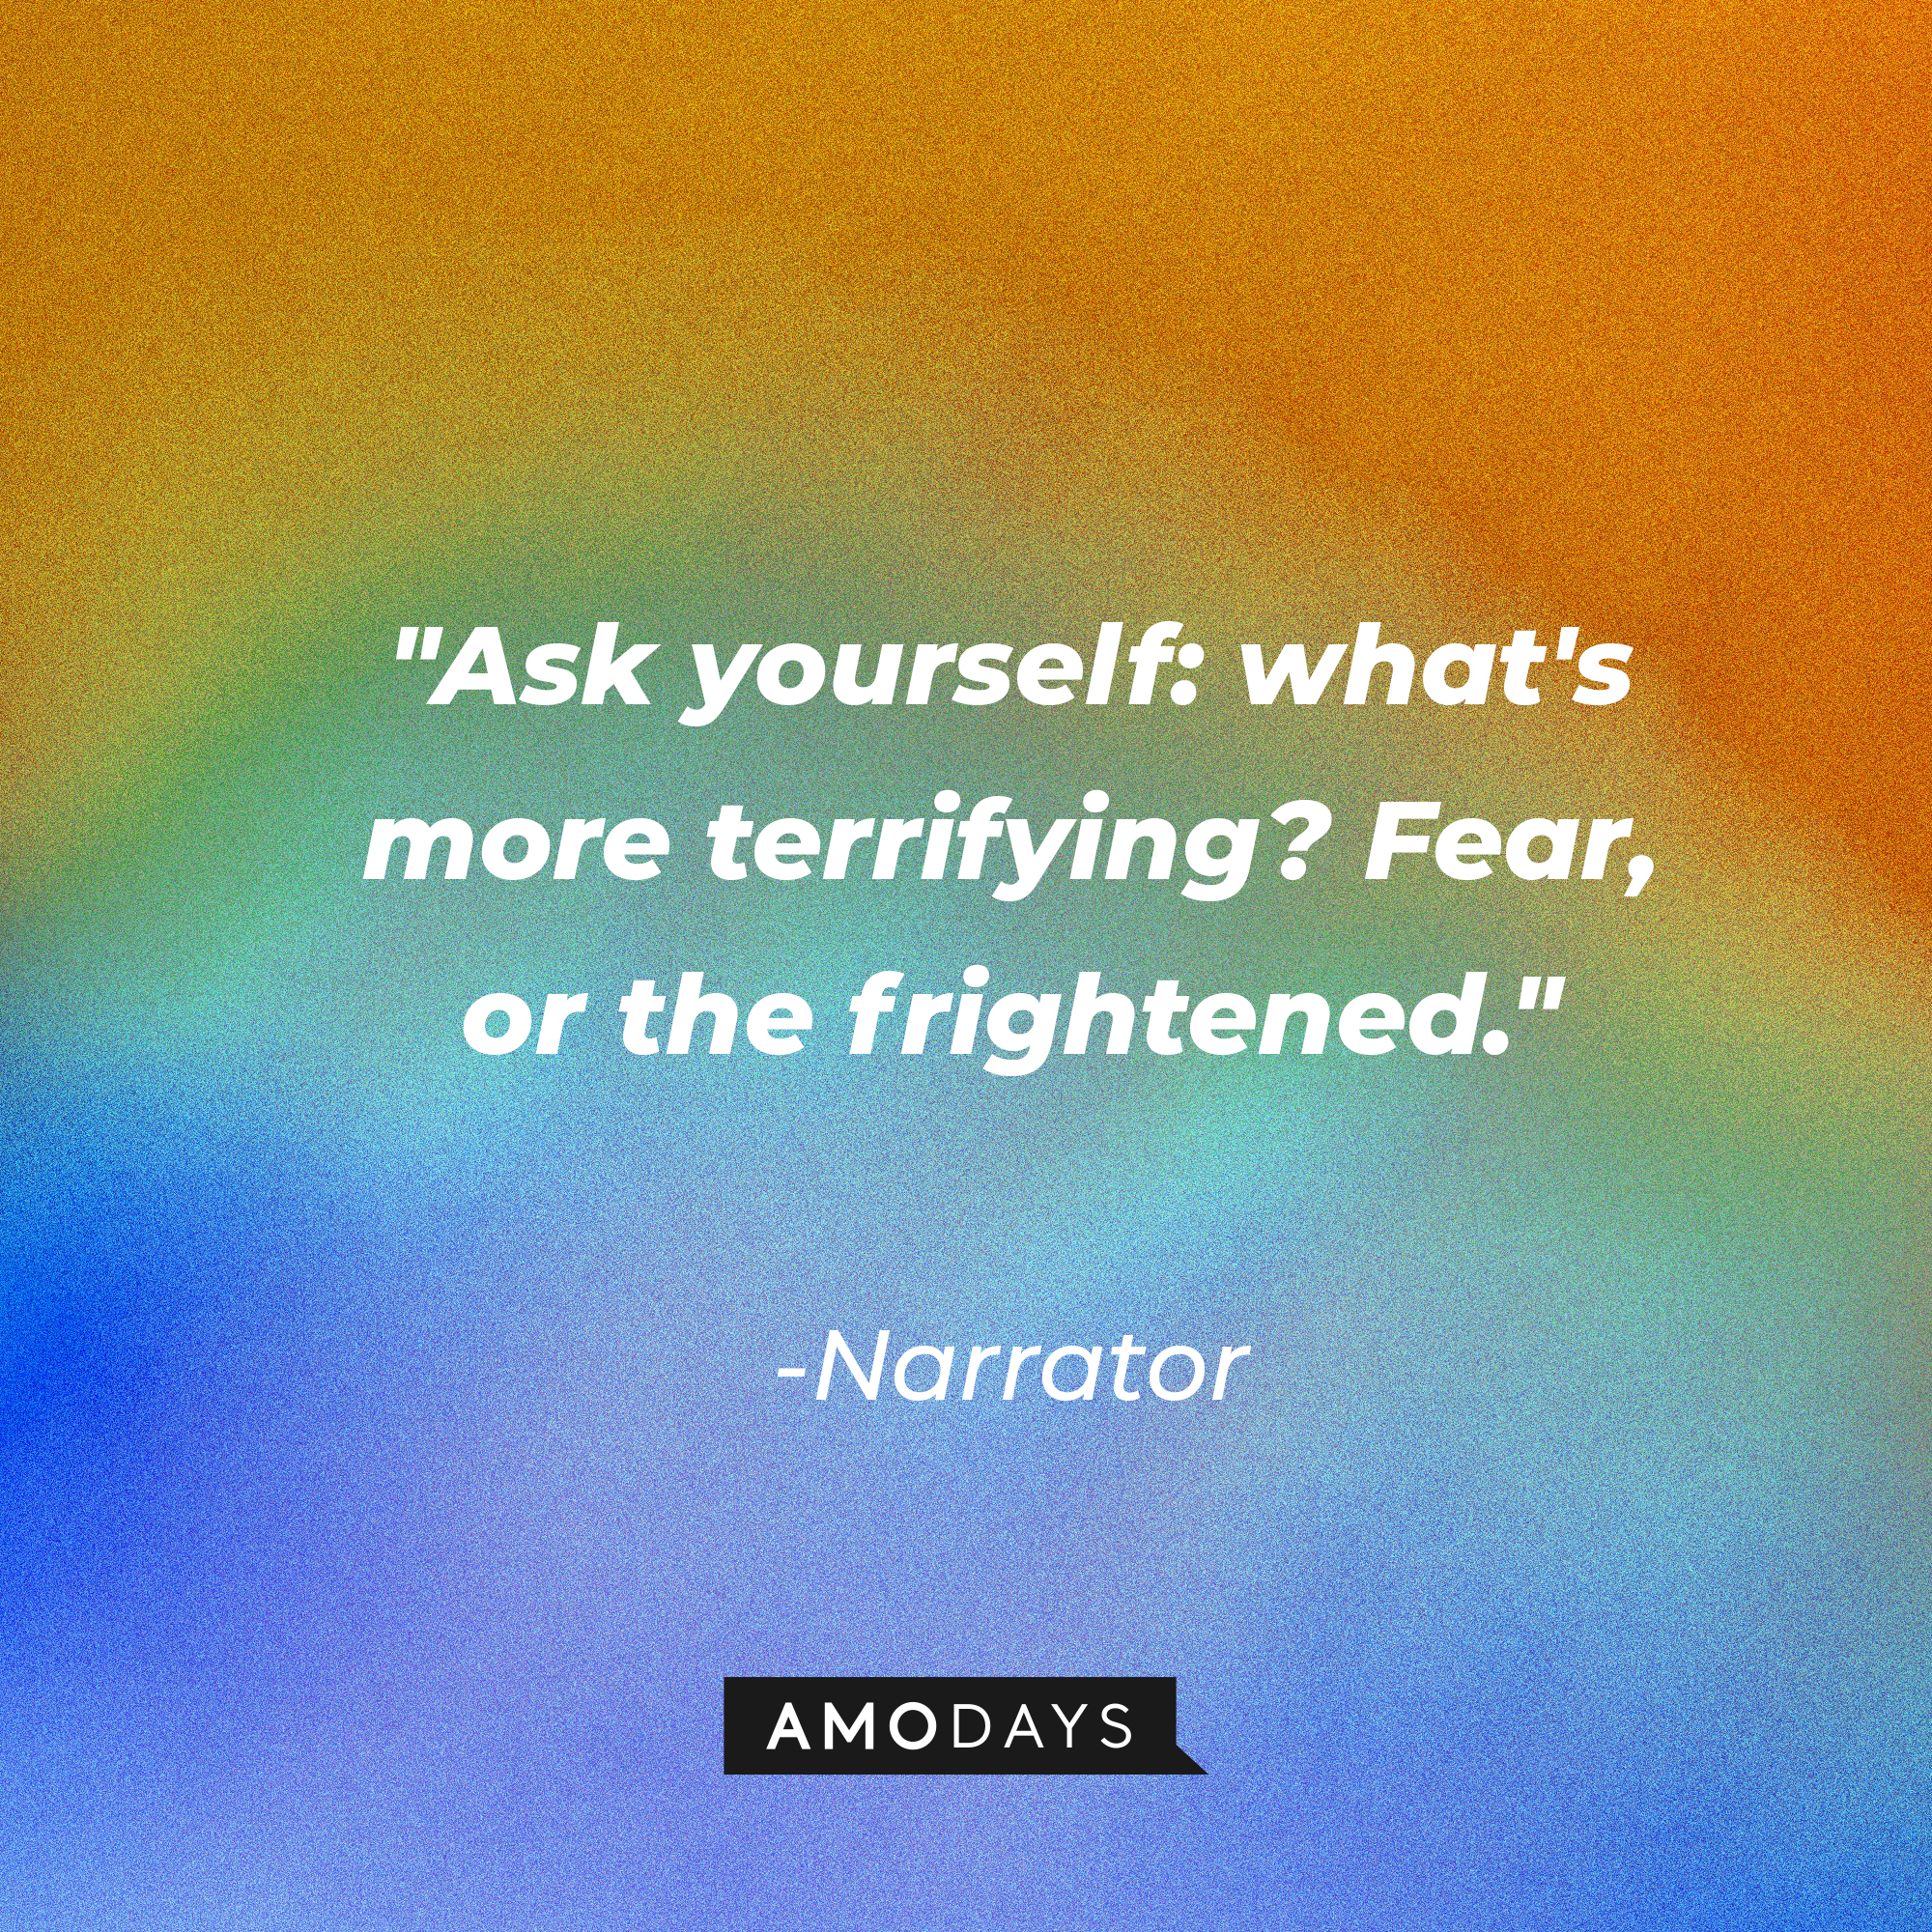 Narrator's quote: "Ask yourself: what's more terrifying? Fear, or the frightened." | Image: AmoDays